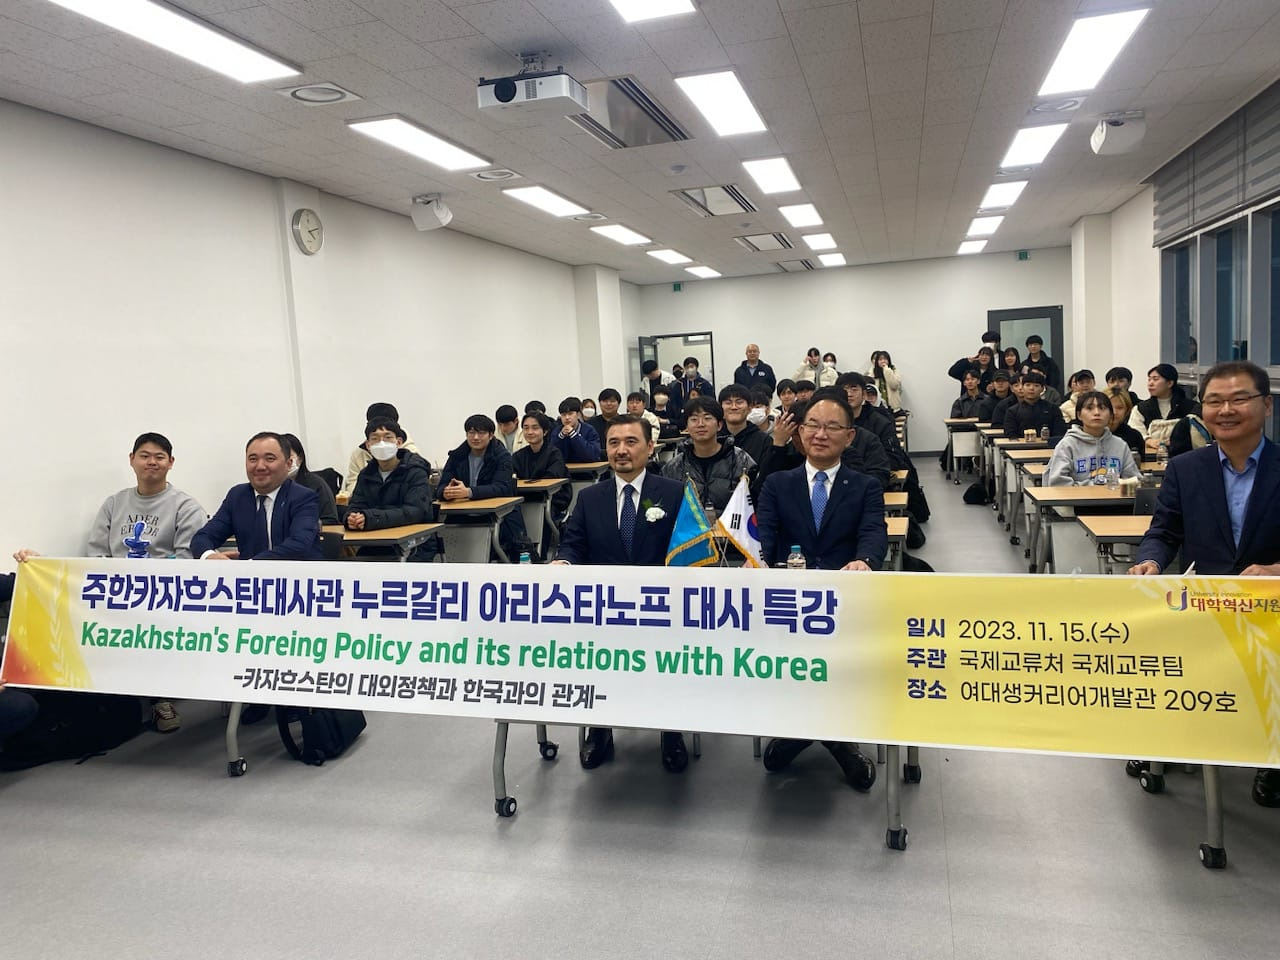 Kazakhstan's Ambassador to Korea, Nurgali Arystanov delivers insights on Kazakhstan's Foreign Policy with Korea at Dong-Eui University in Busan on Wednesday. (Kazakh Embassy in Seoul)